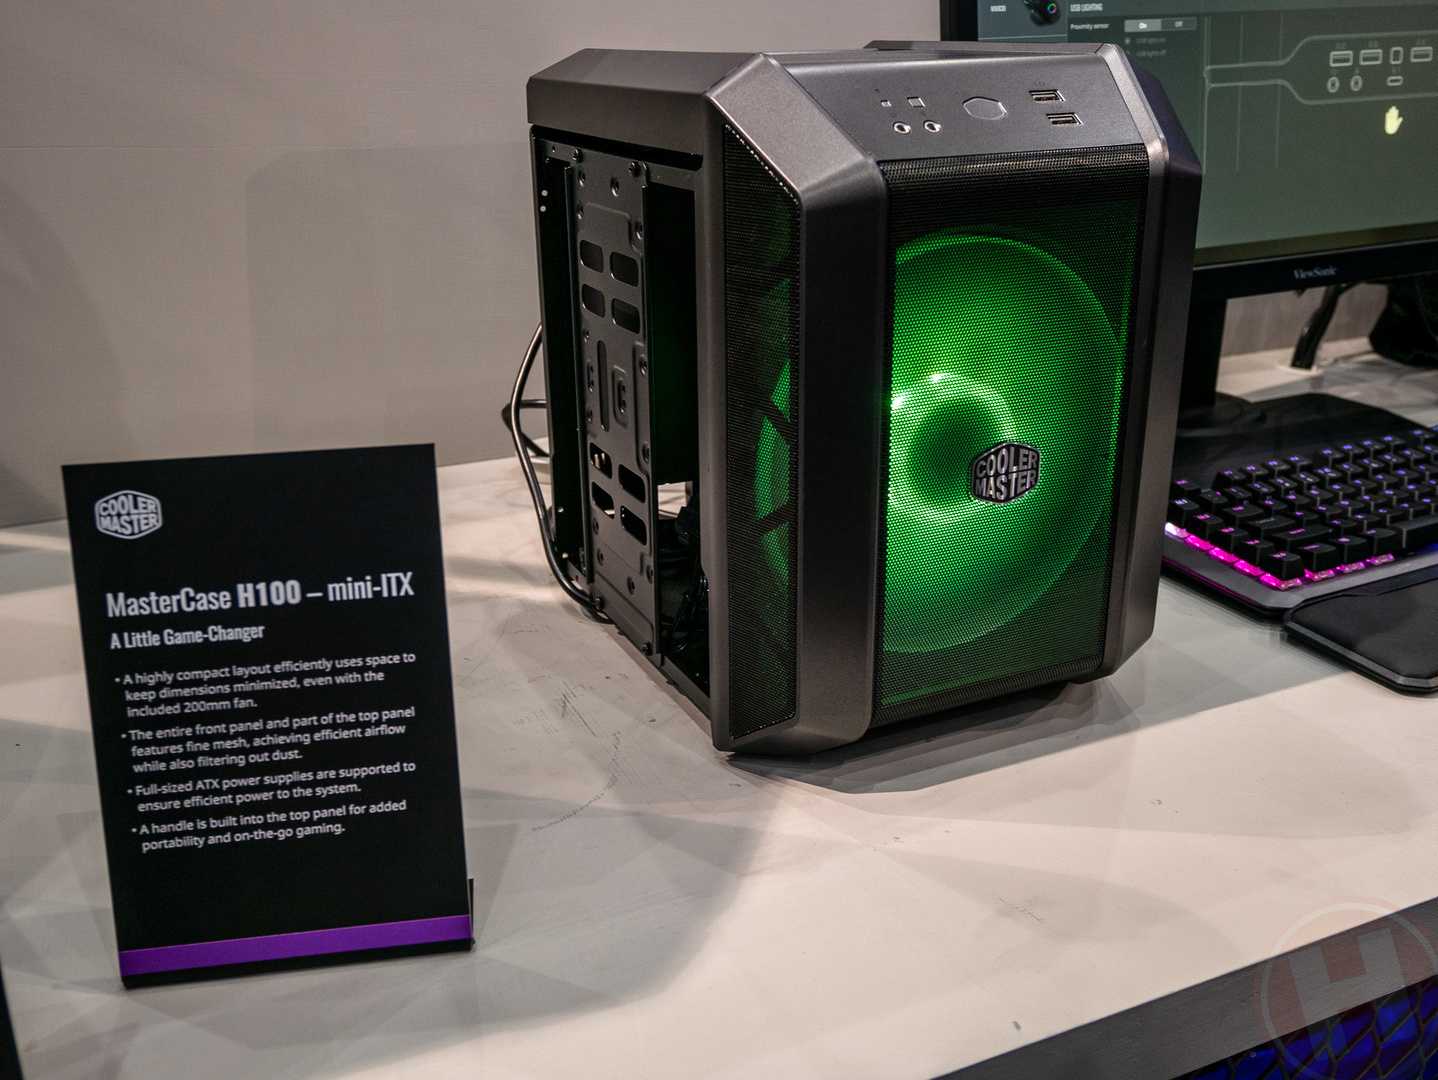 Cooler master mastercase h100 mini-itx chassis review